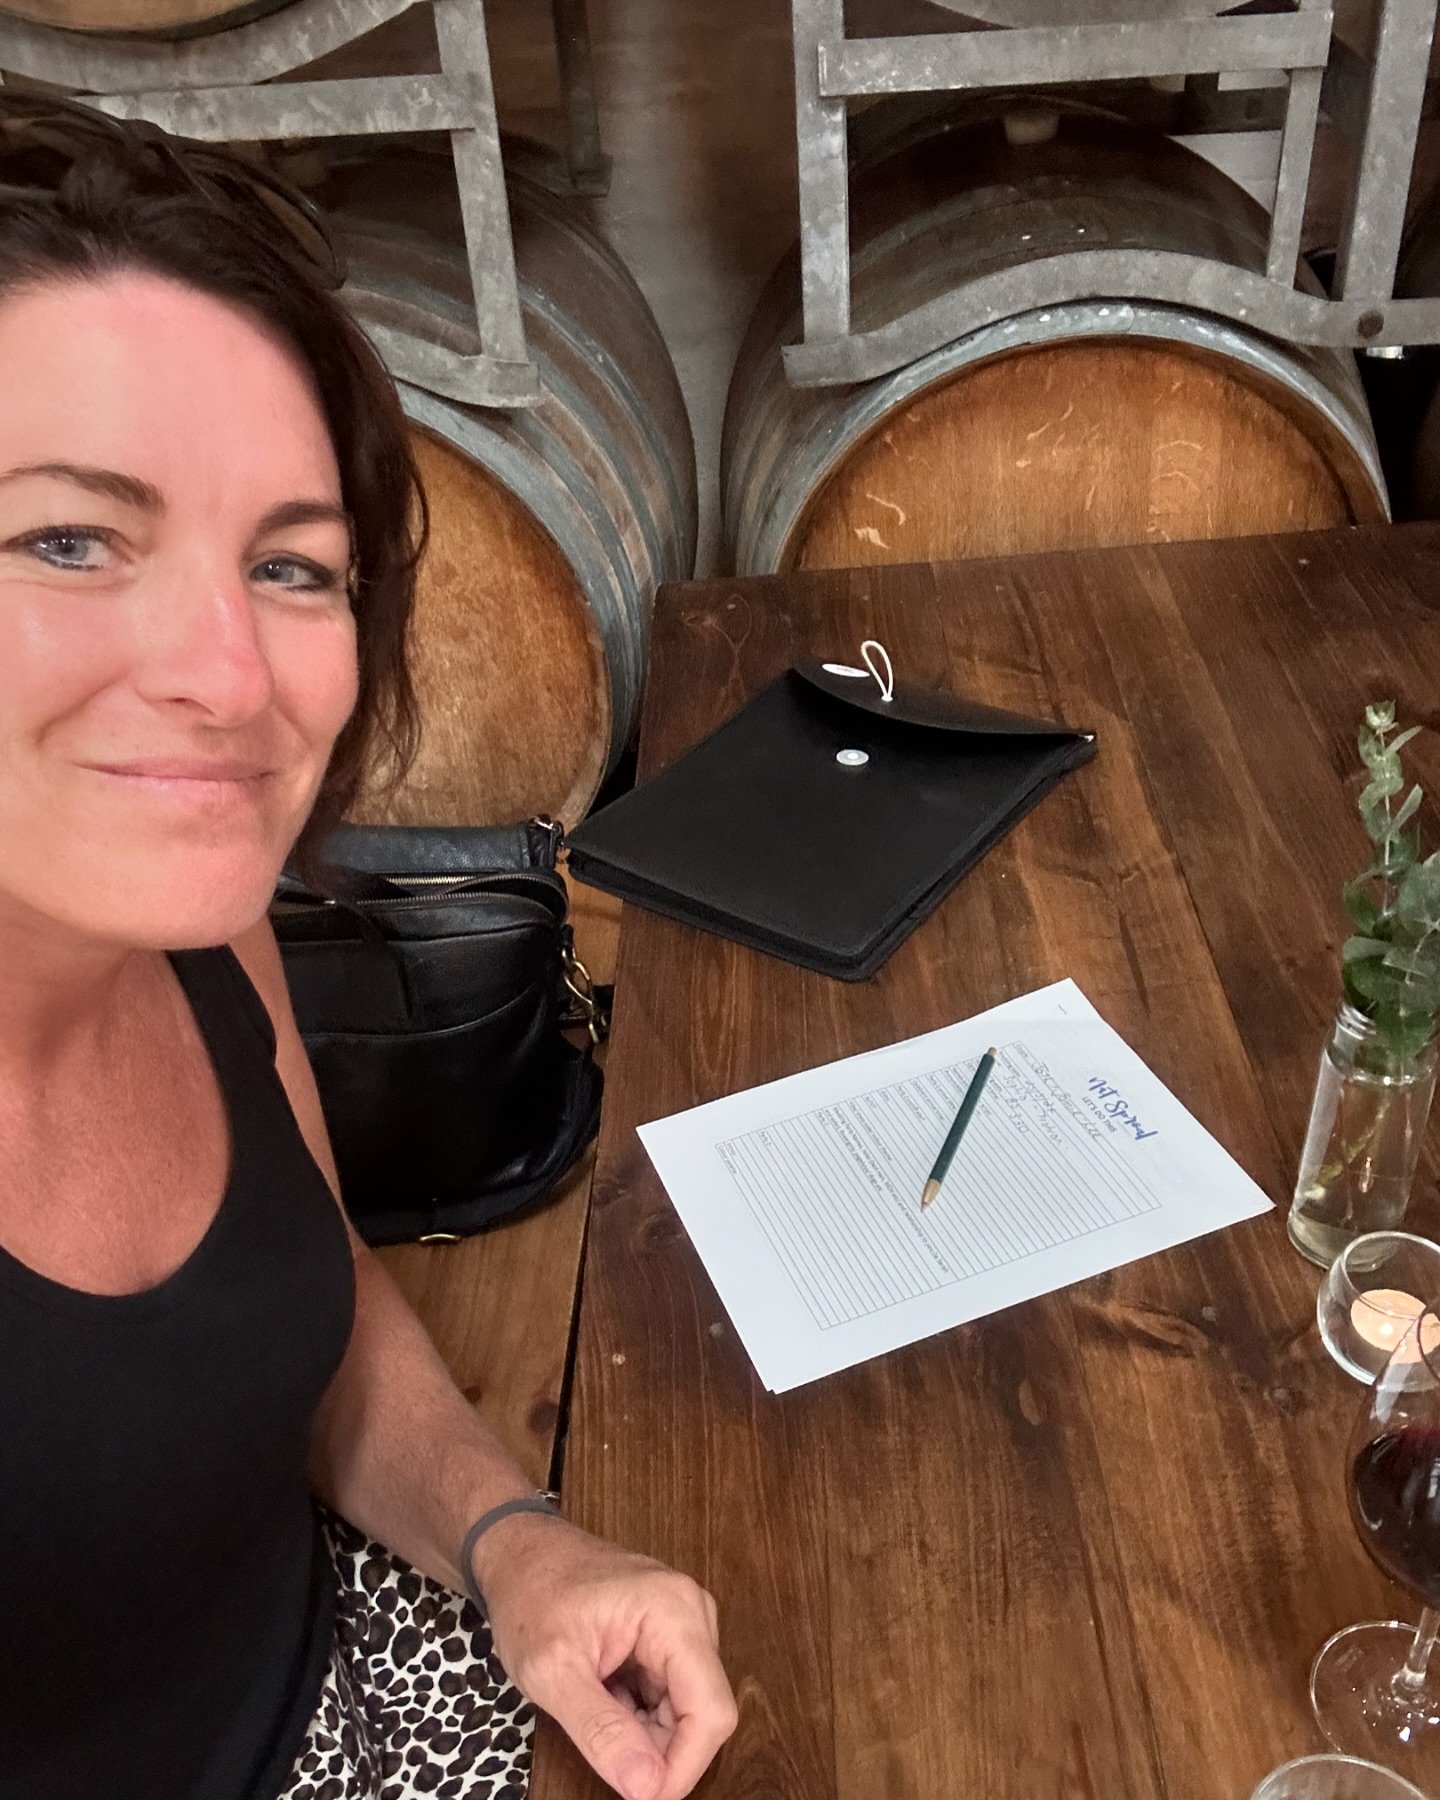 You&rsquo;ll find me here most Thursday evenings planning ceremonies and signing NOIMs with my couples. It&rsquo;s very chilled, involves a bev and often a meal too and is a great opportunity to get to know each other a bit more. 
.
I find it so valu